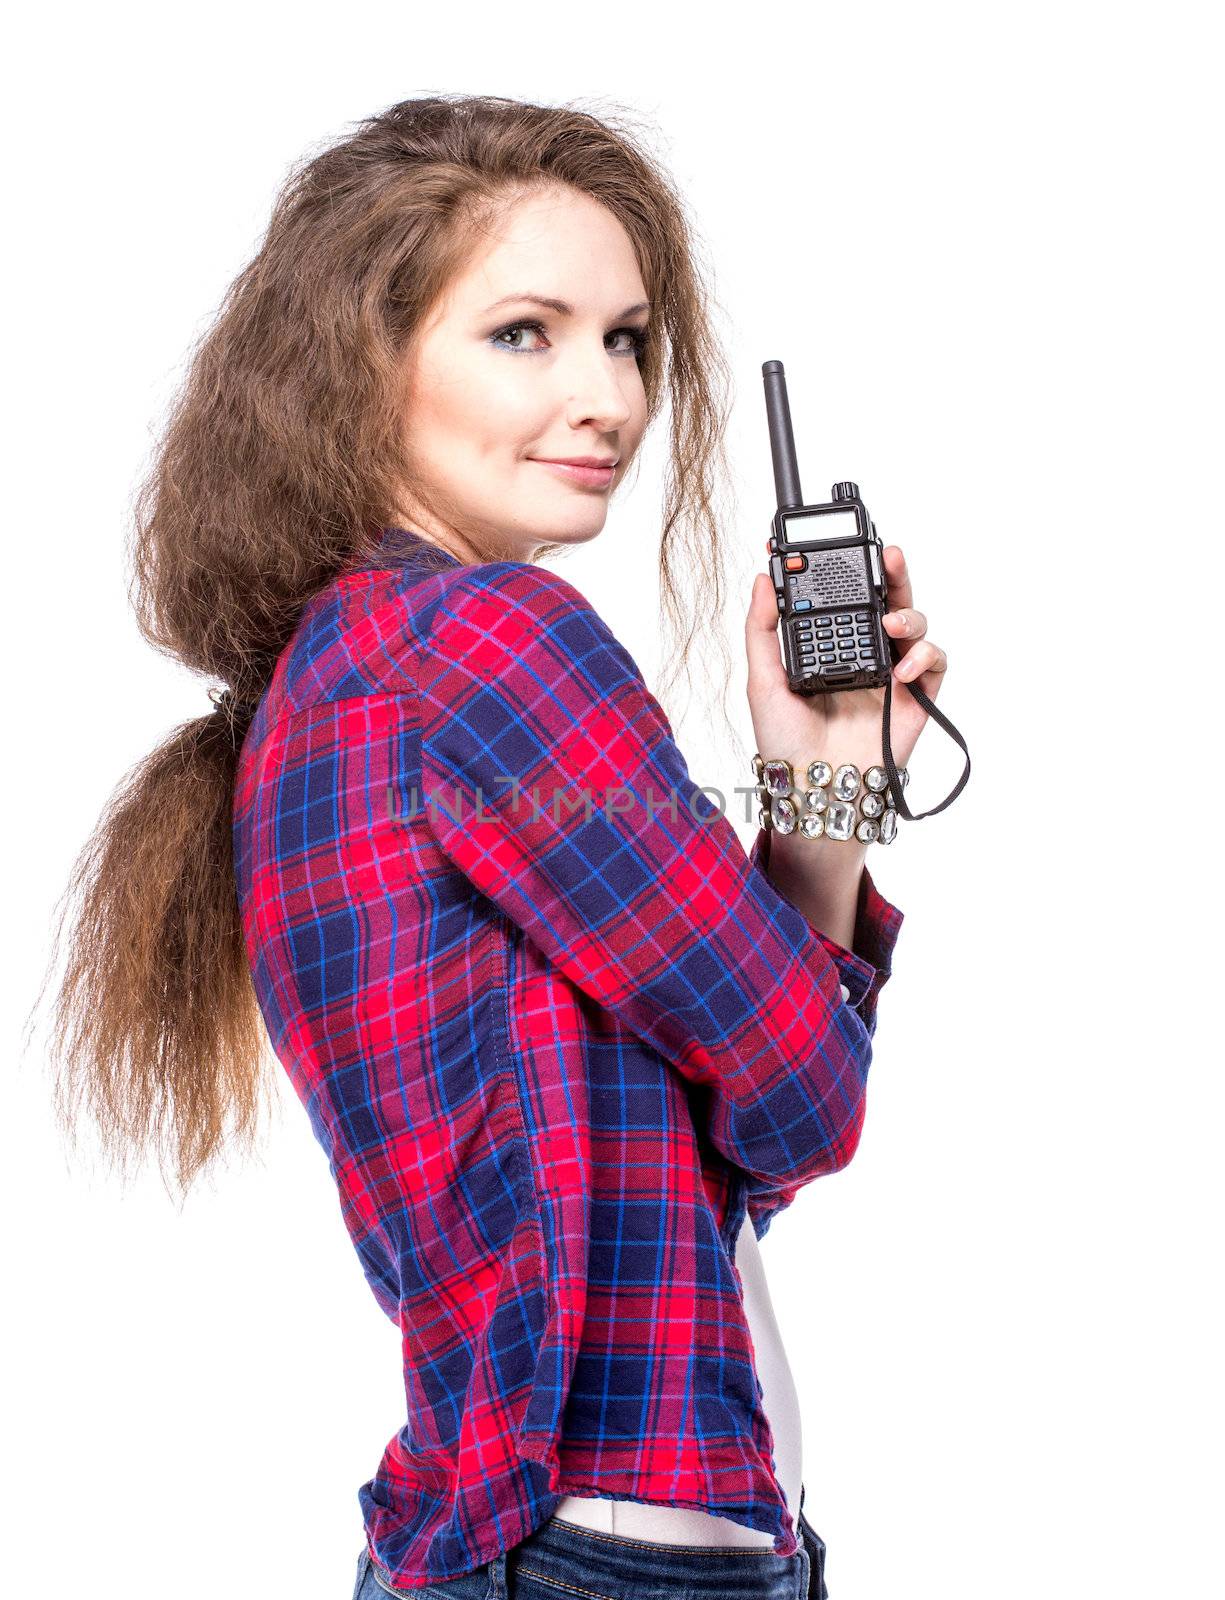 Attractive young woman in a checkered shirt with walkie talkie, by gsdonlin